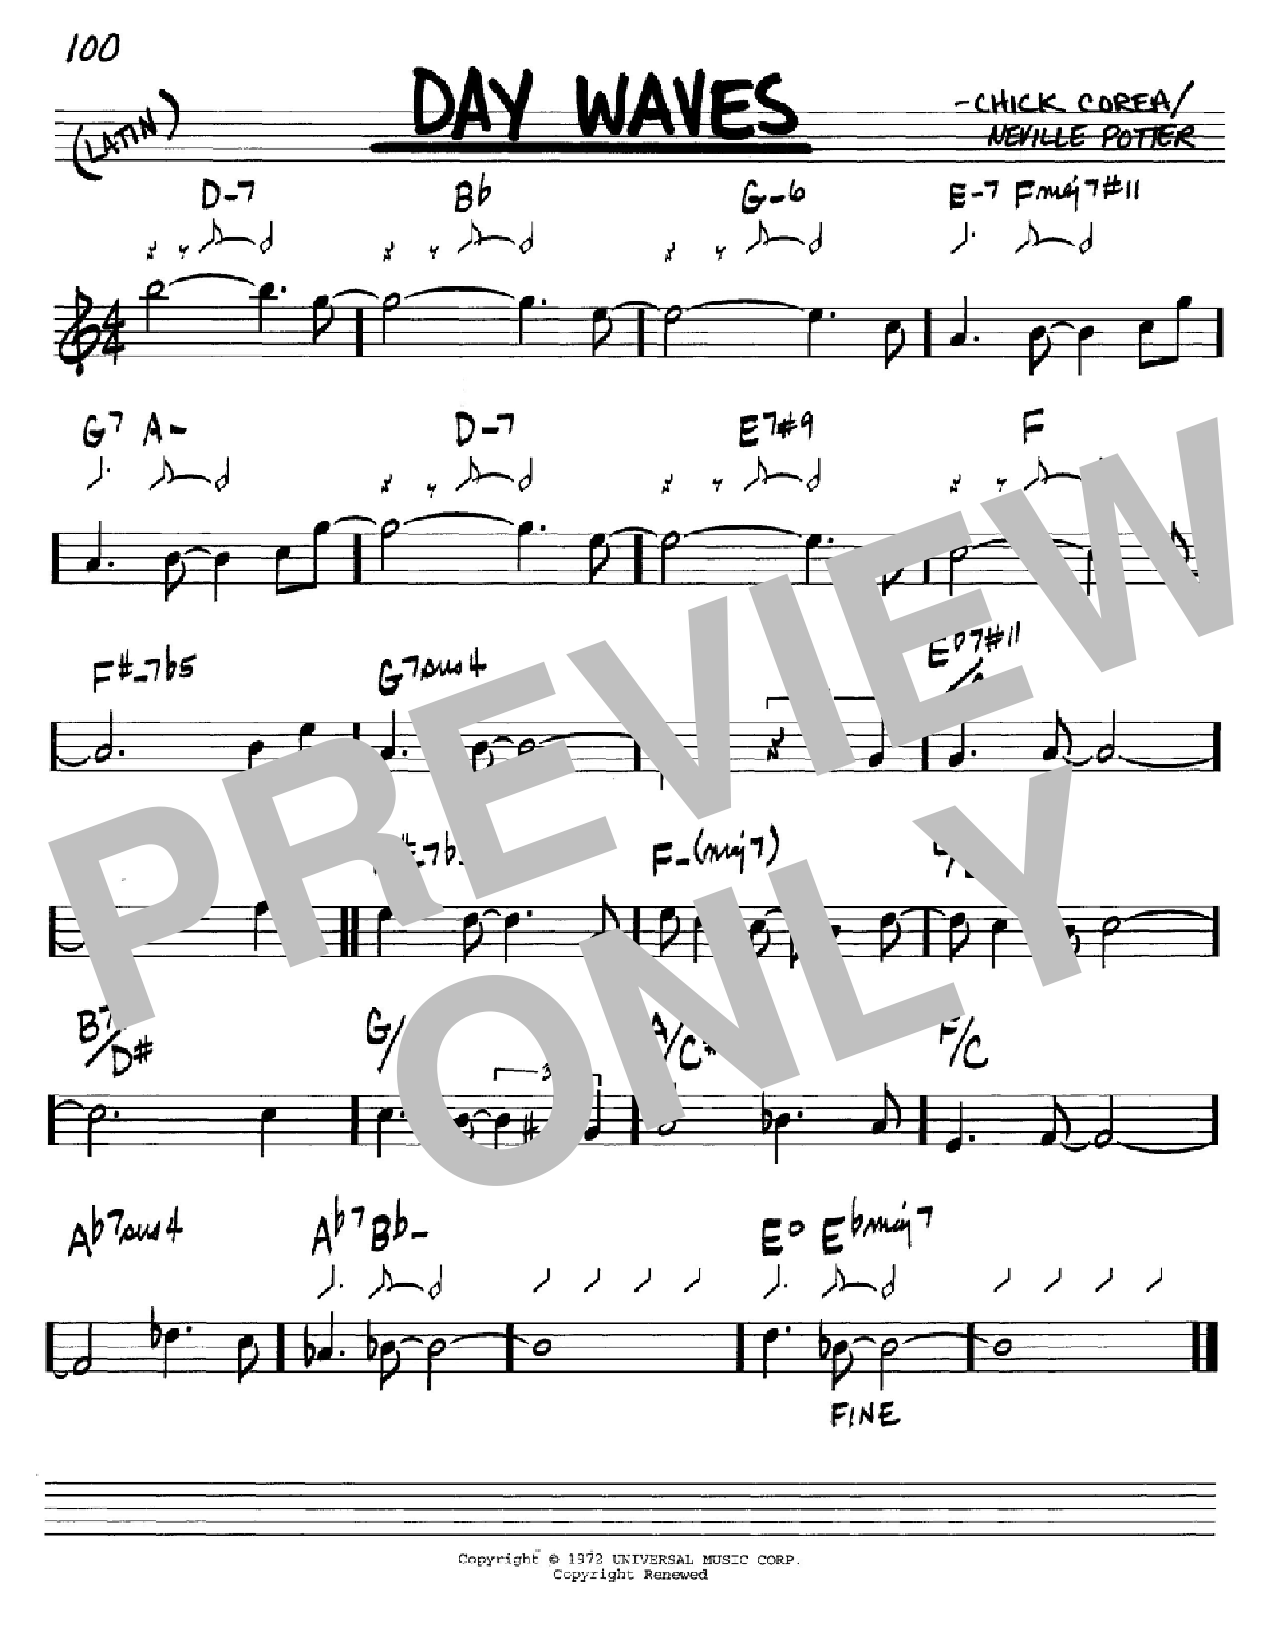 Download Chick Corea Day Waves Sheet Music